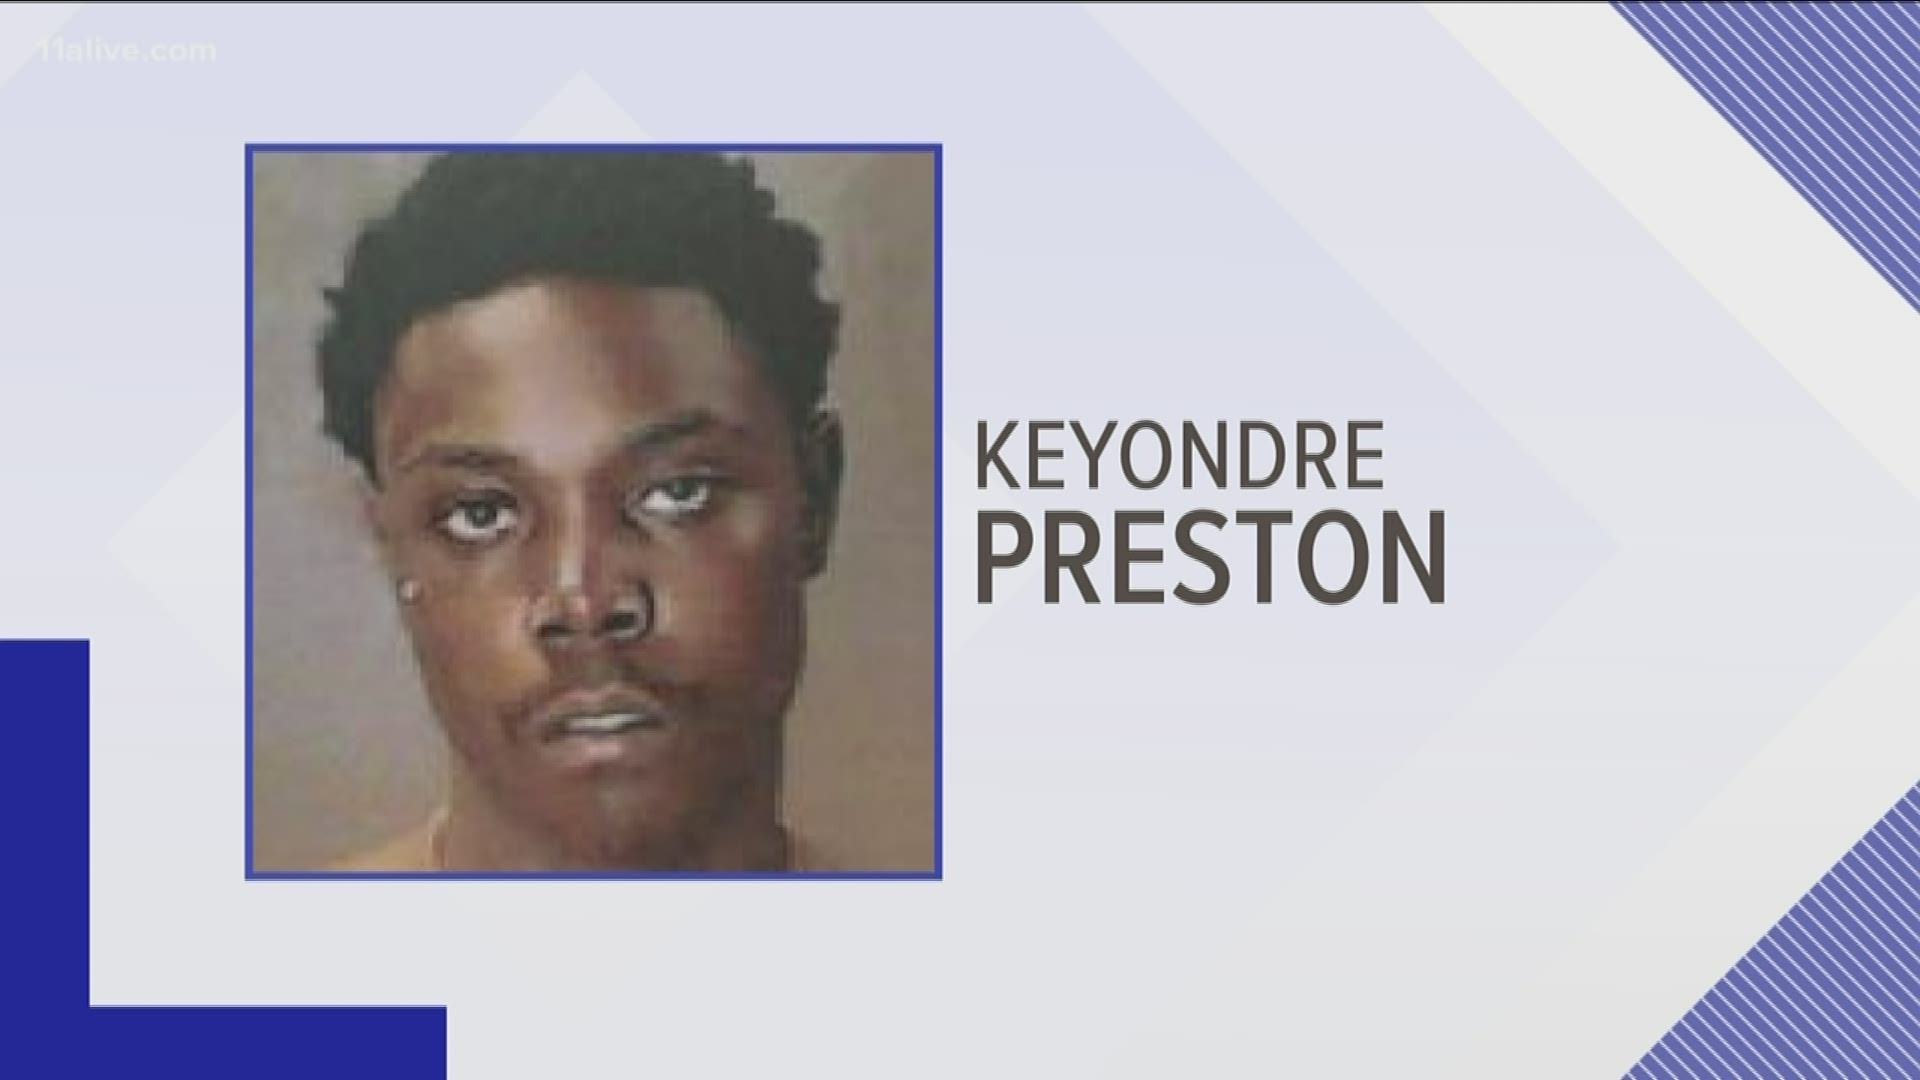 Authorities arrested Keyondre Preston April 21 at a Cordele, Georgia motel after a search that lasted weeks.